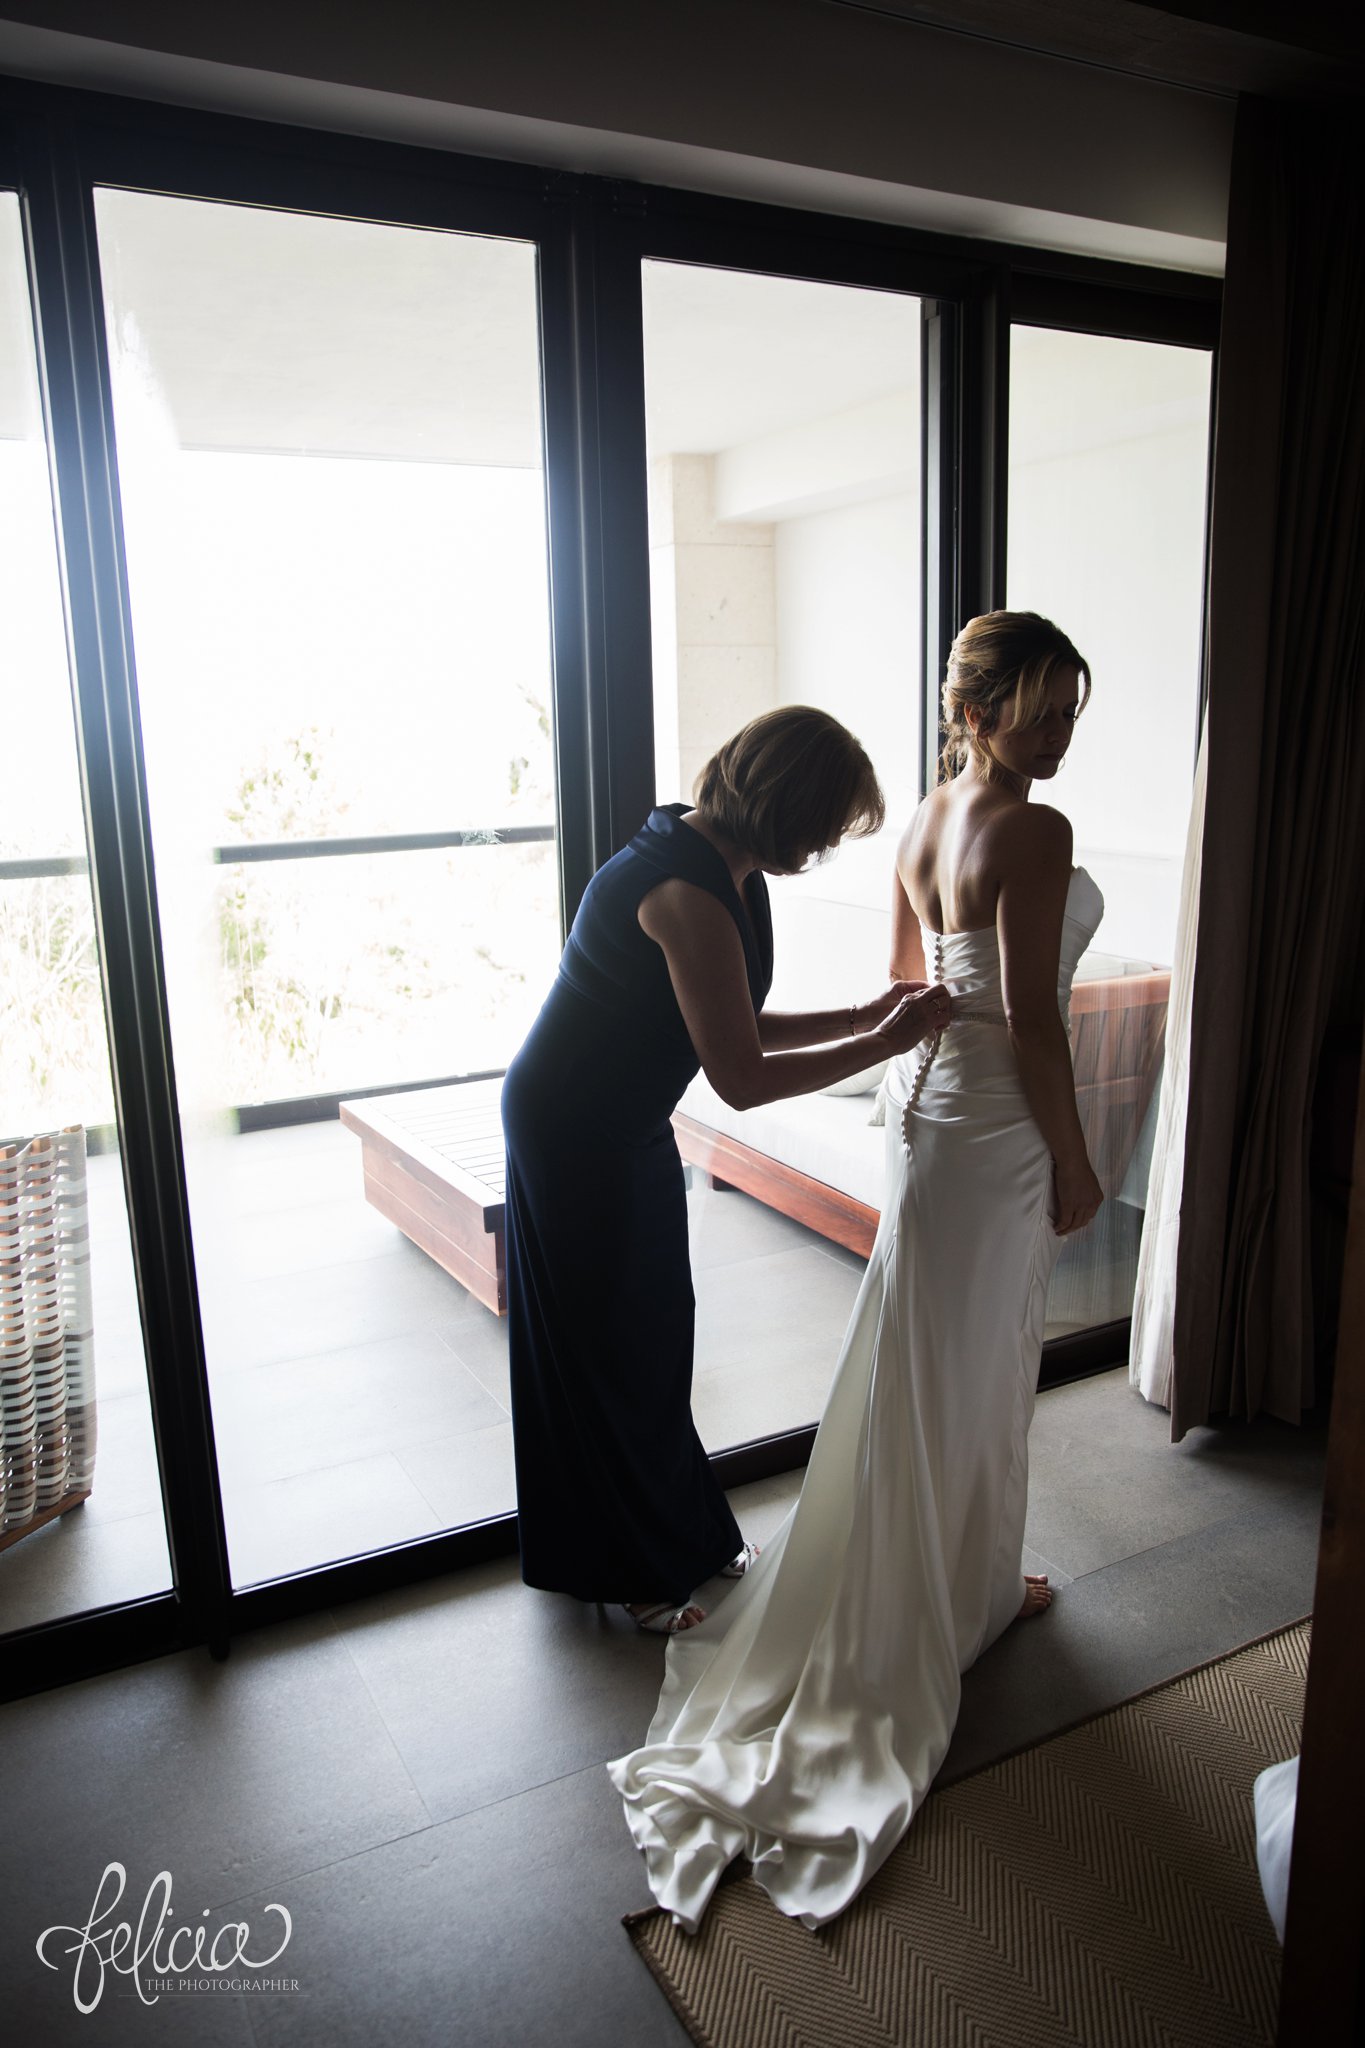 images by feliciathephotographer.com | Destination Beach Wedding | Unicco 20 87 | Photographer | L&S Travel | getting ready | putting on the dress | mother daughter | natural light | casablanca bridal | buttons | elegant 